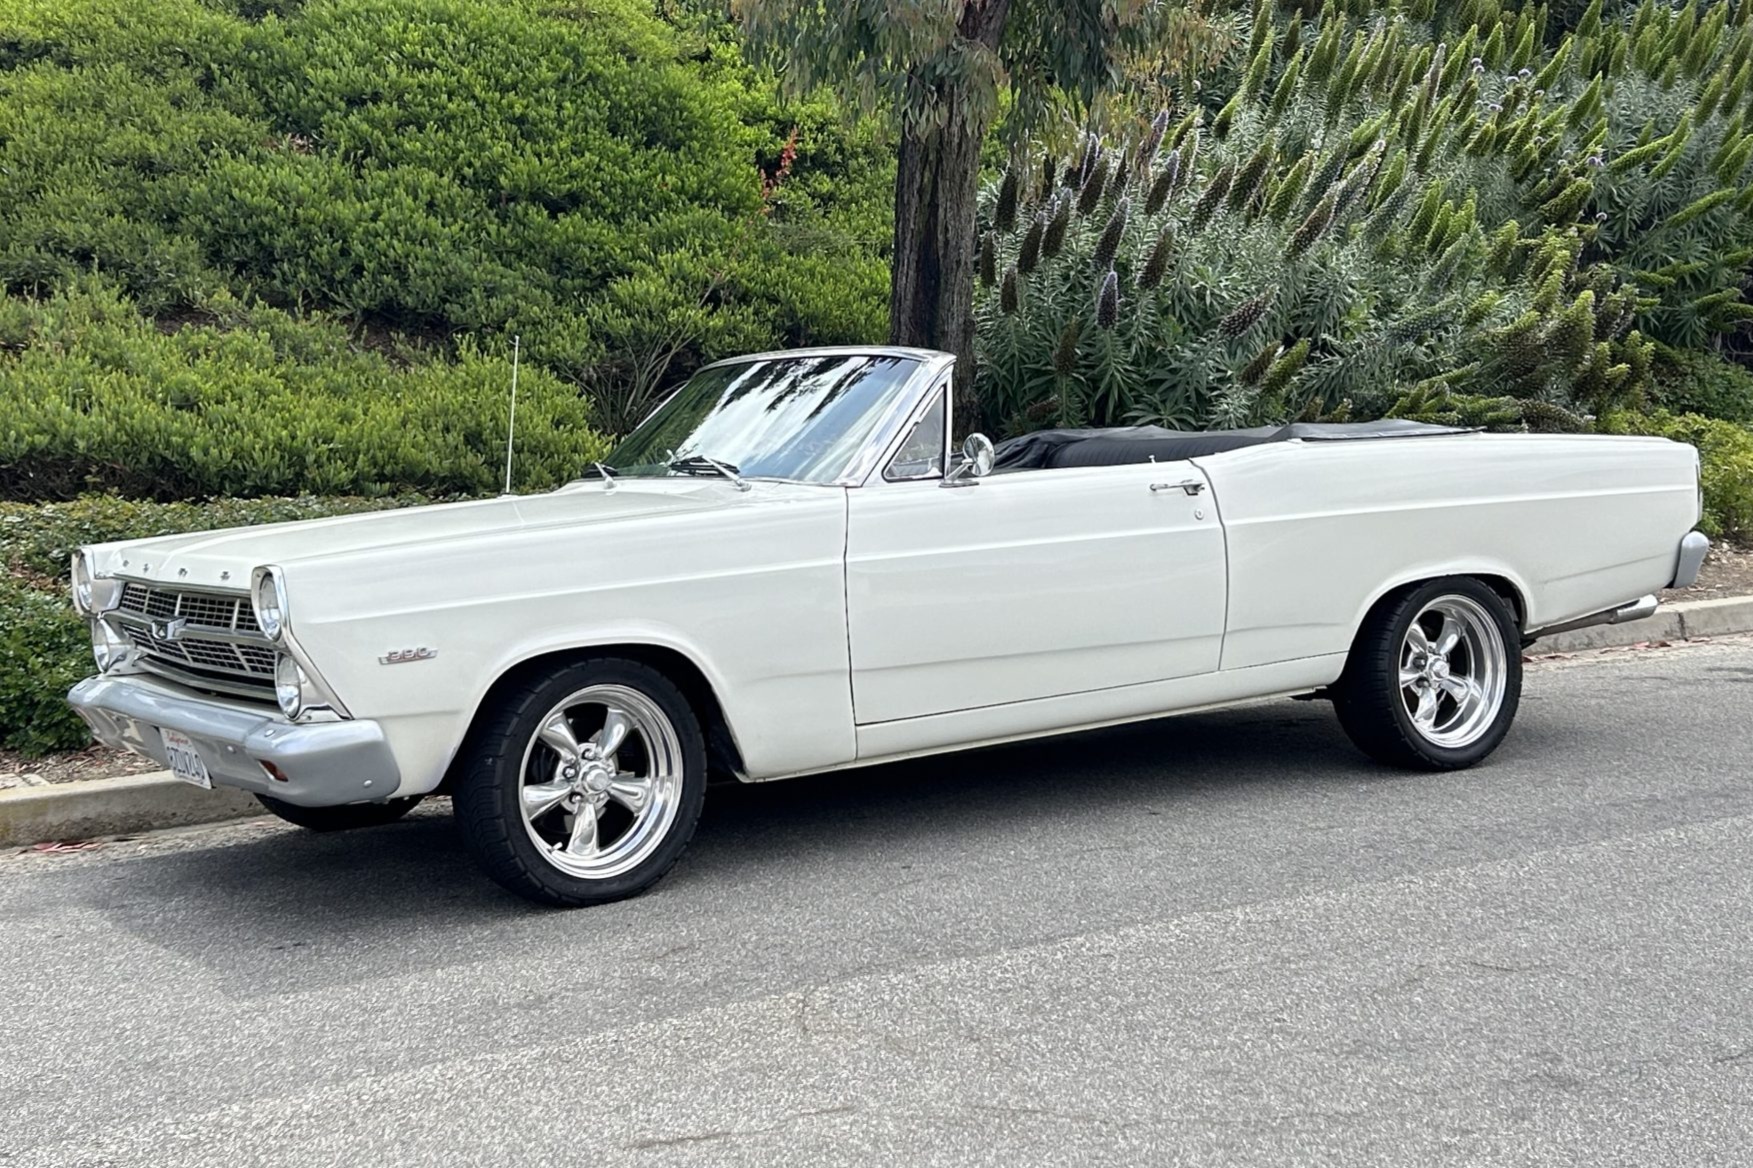 Used 1967 Ford Fairlane 500 Convertible Review